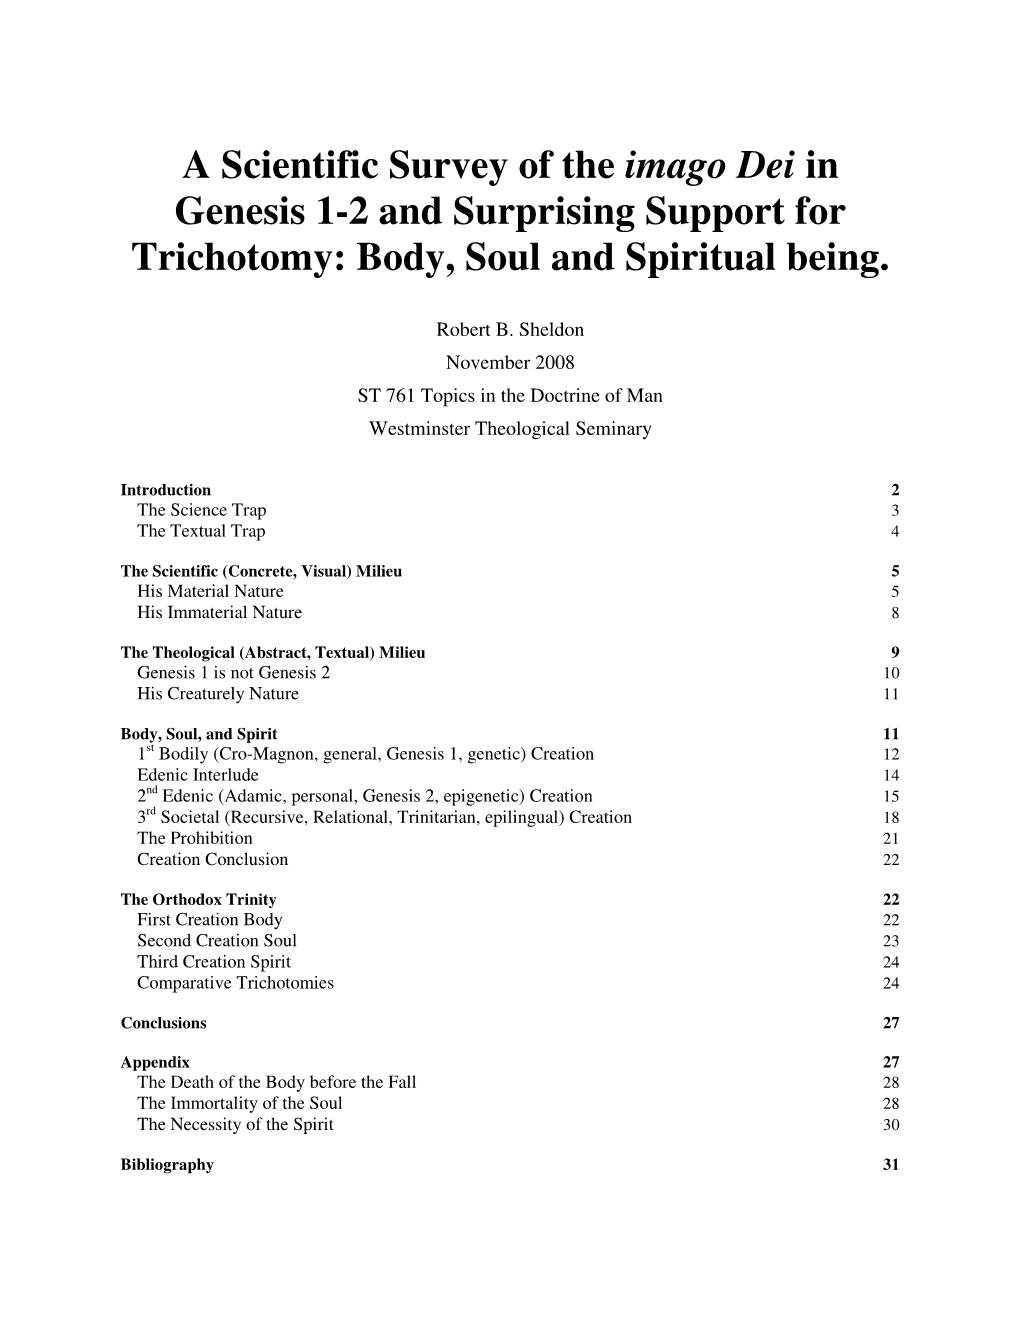 A Scientific Survey of the Imago Dei in Genesis 1-2 and Surprising Support for Trichotomy: Body, Soul and Spiritual Being